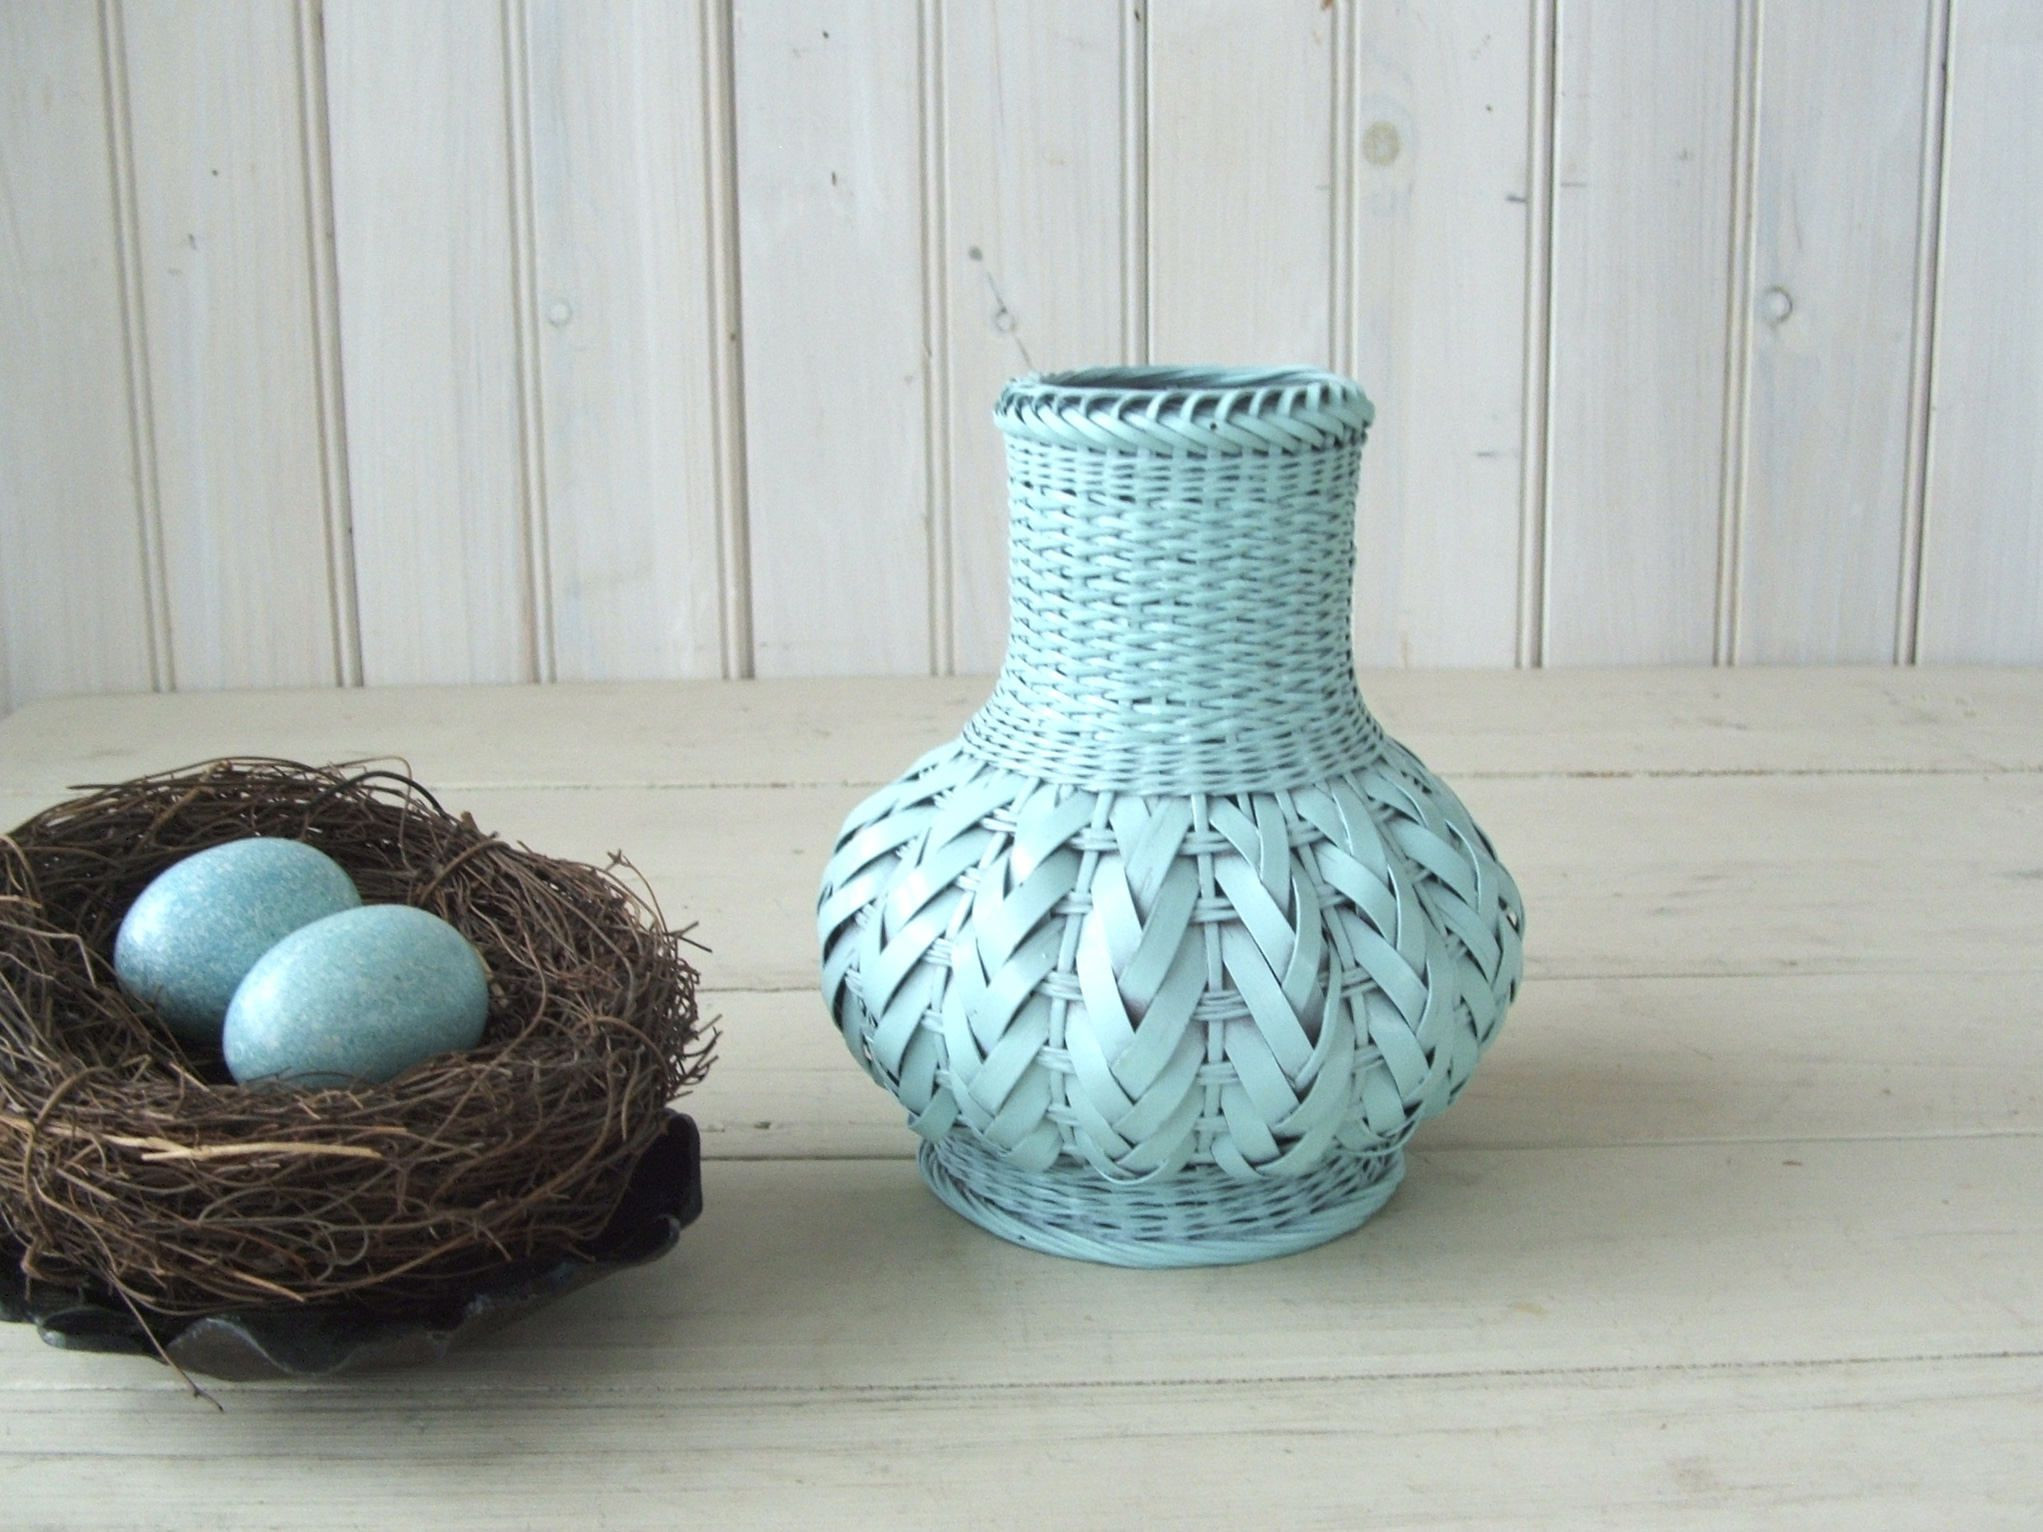 12 Nice Handmade Glass Vase From Poland 2024 free download handmade glass vase from poland of vintage blue wicker covered glass vase by lookonmytreasures on etsy within vintage blue wicker covered glass vase by lookonmytreasures on etsy